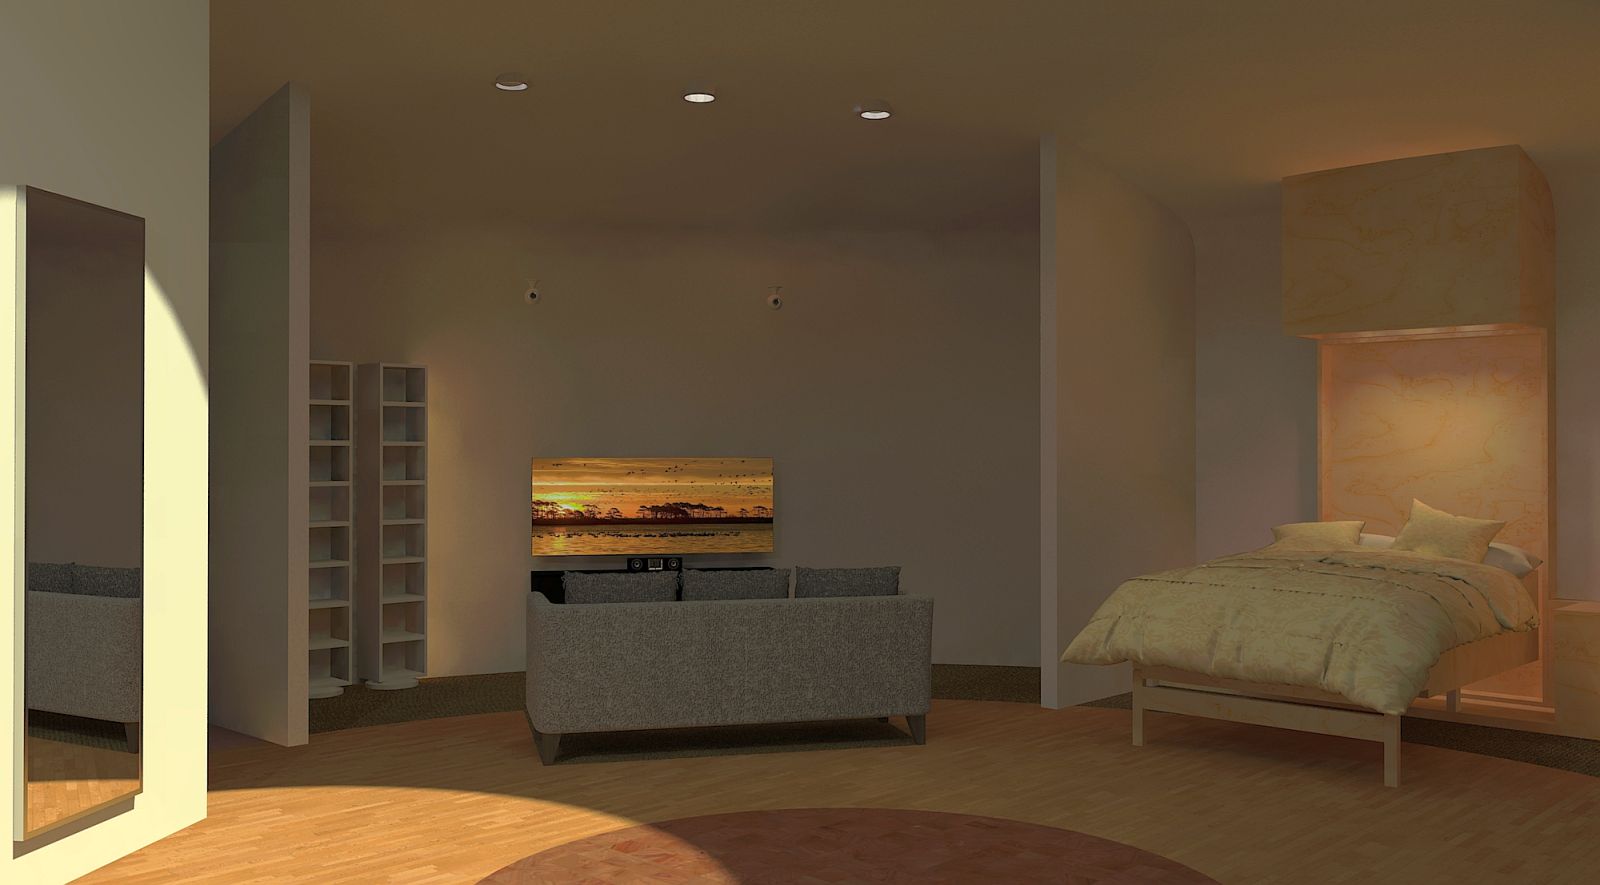 Bedroom and living area.